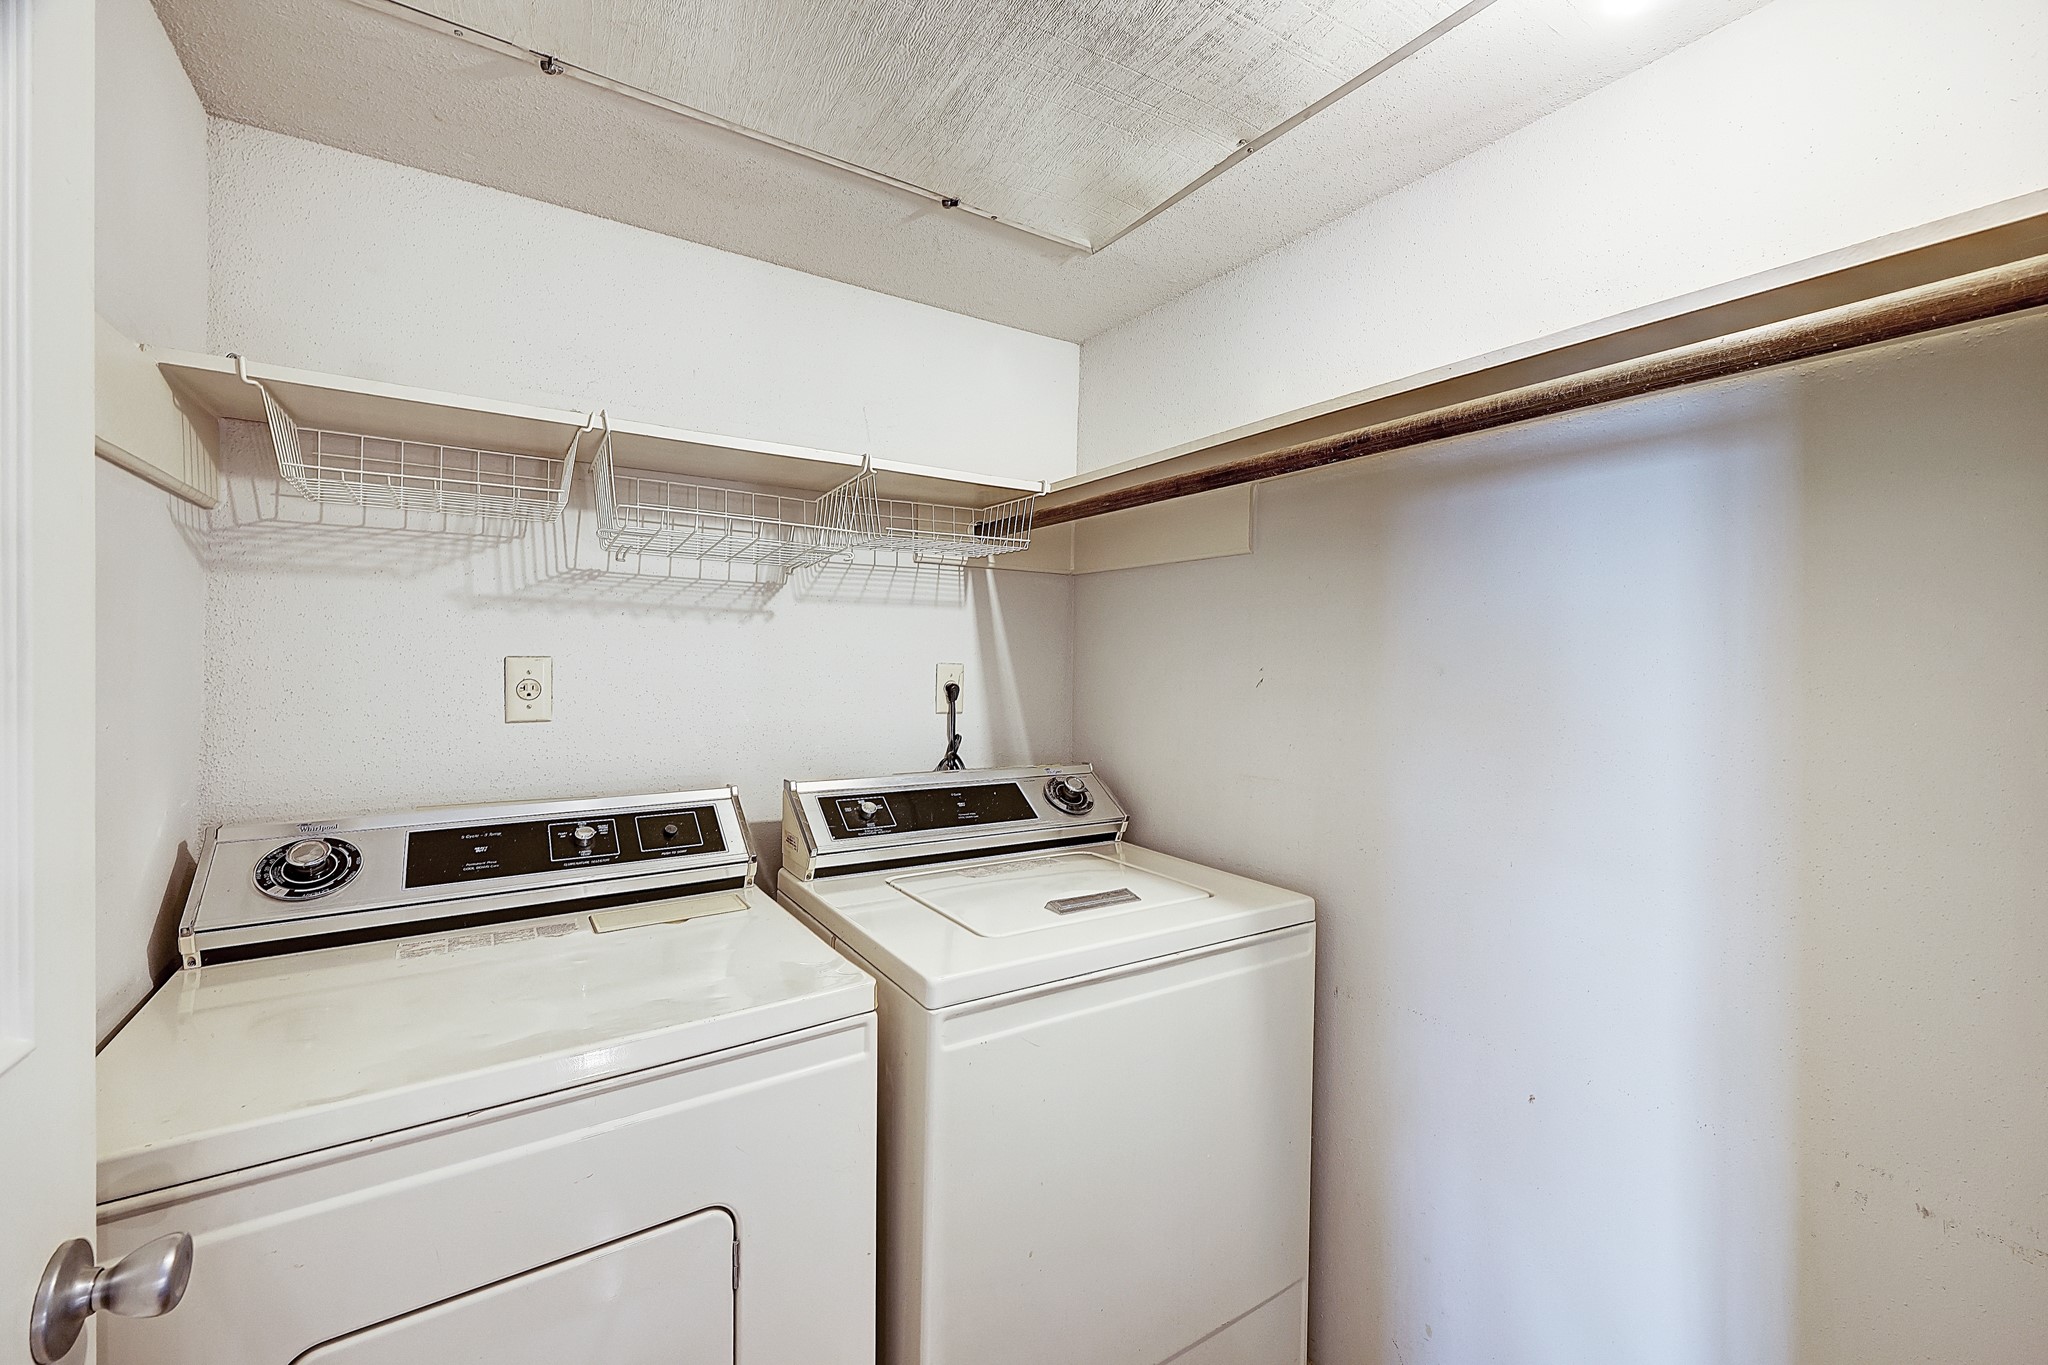 [Laundry Room]
Located on the second floor, the laundry room is near the primary and guest rooms.